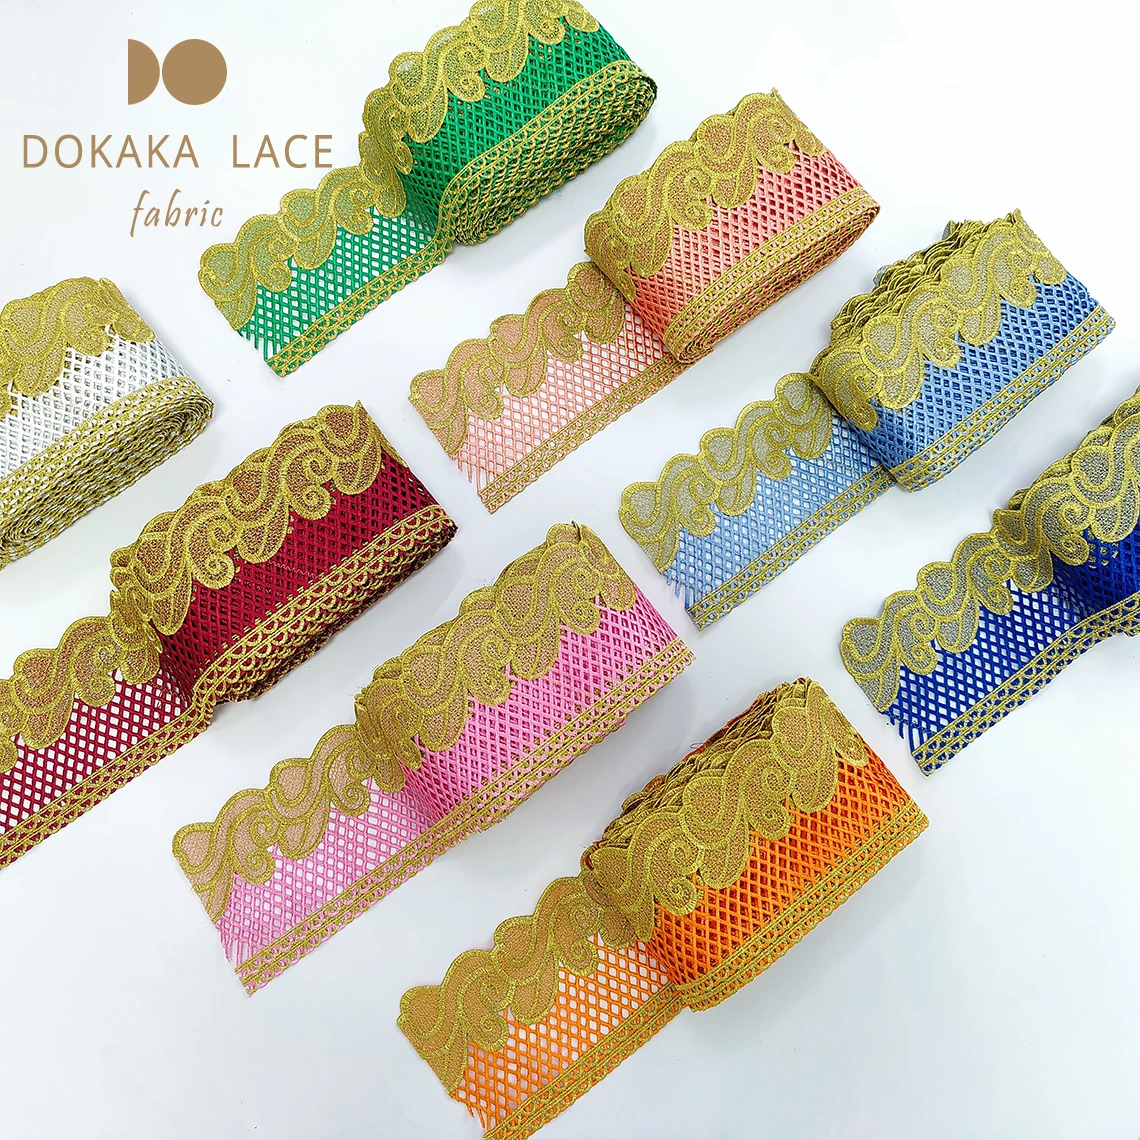 5 Yards African Lace Fabric 2021 High Quality Ribbon Bilateral Handicra Sewing Accessories Senegal Bride Dress Material